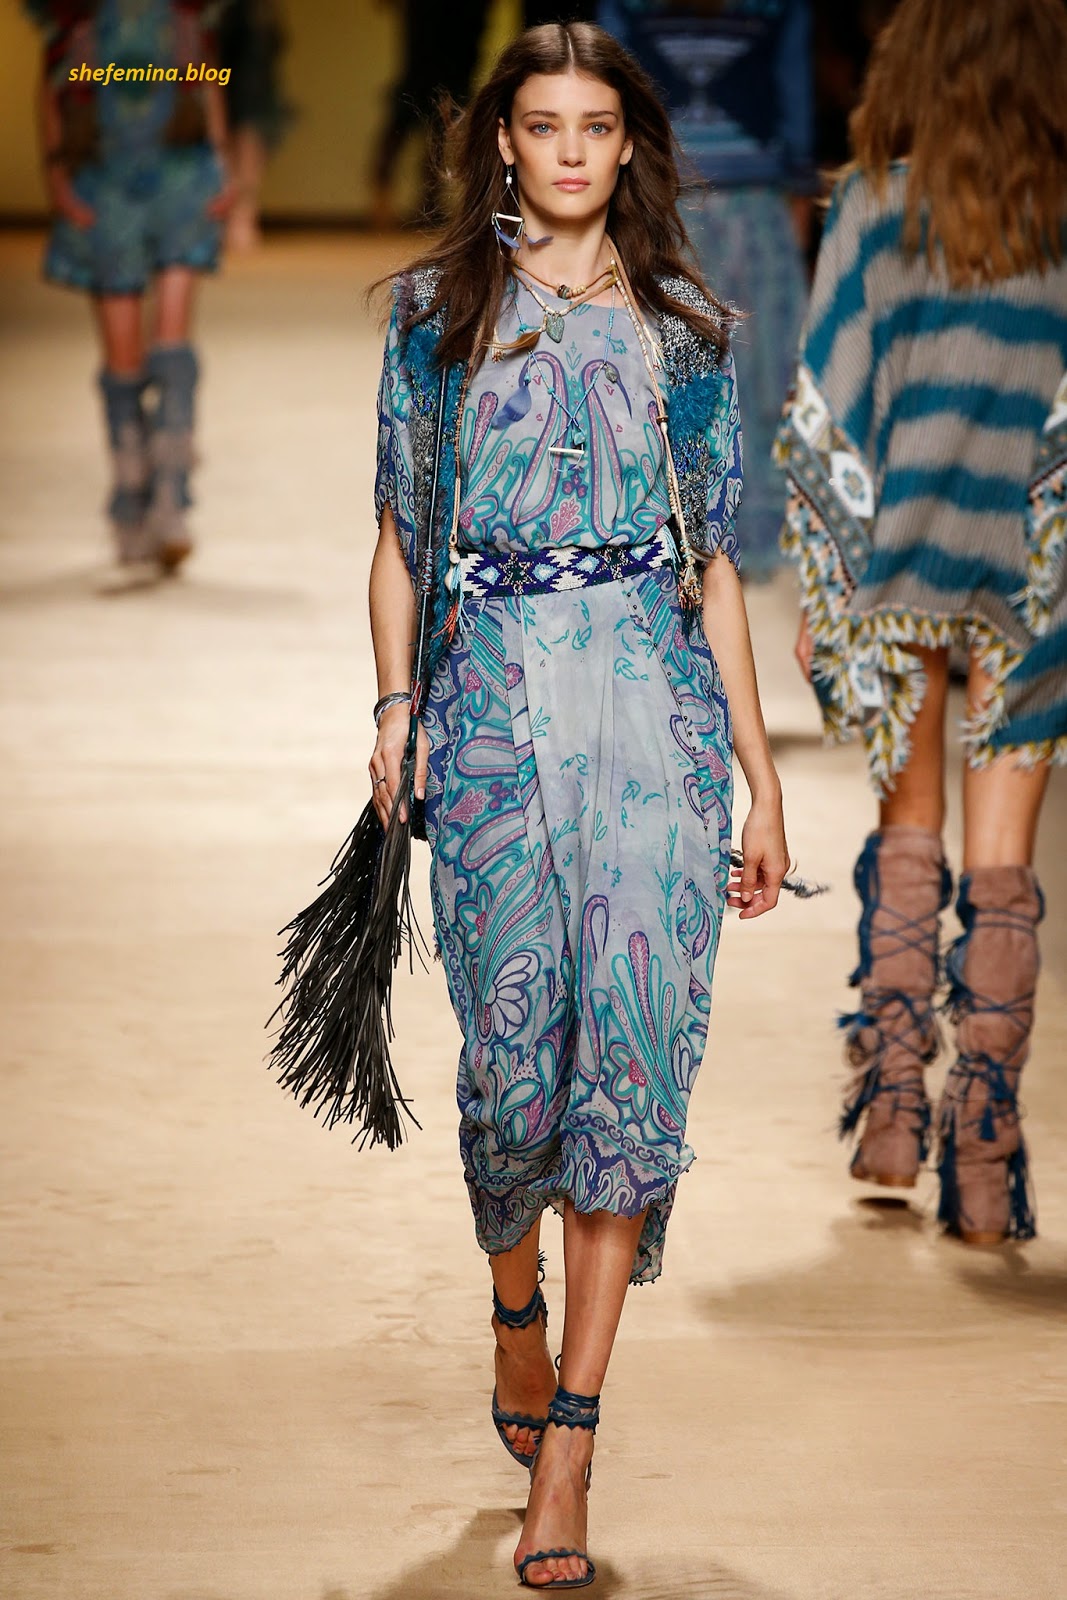 Etro Spring 2015 Ready-to-Wear Dresses Collation at Fashioh Show Runway ...